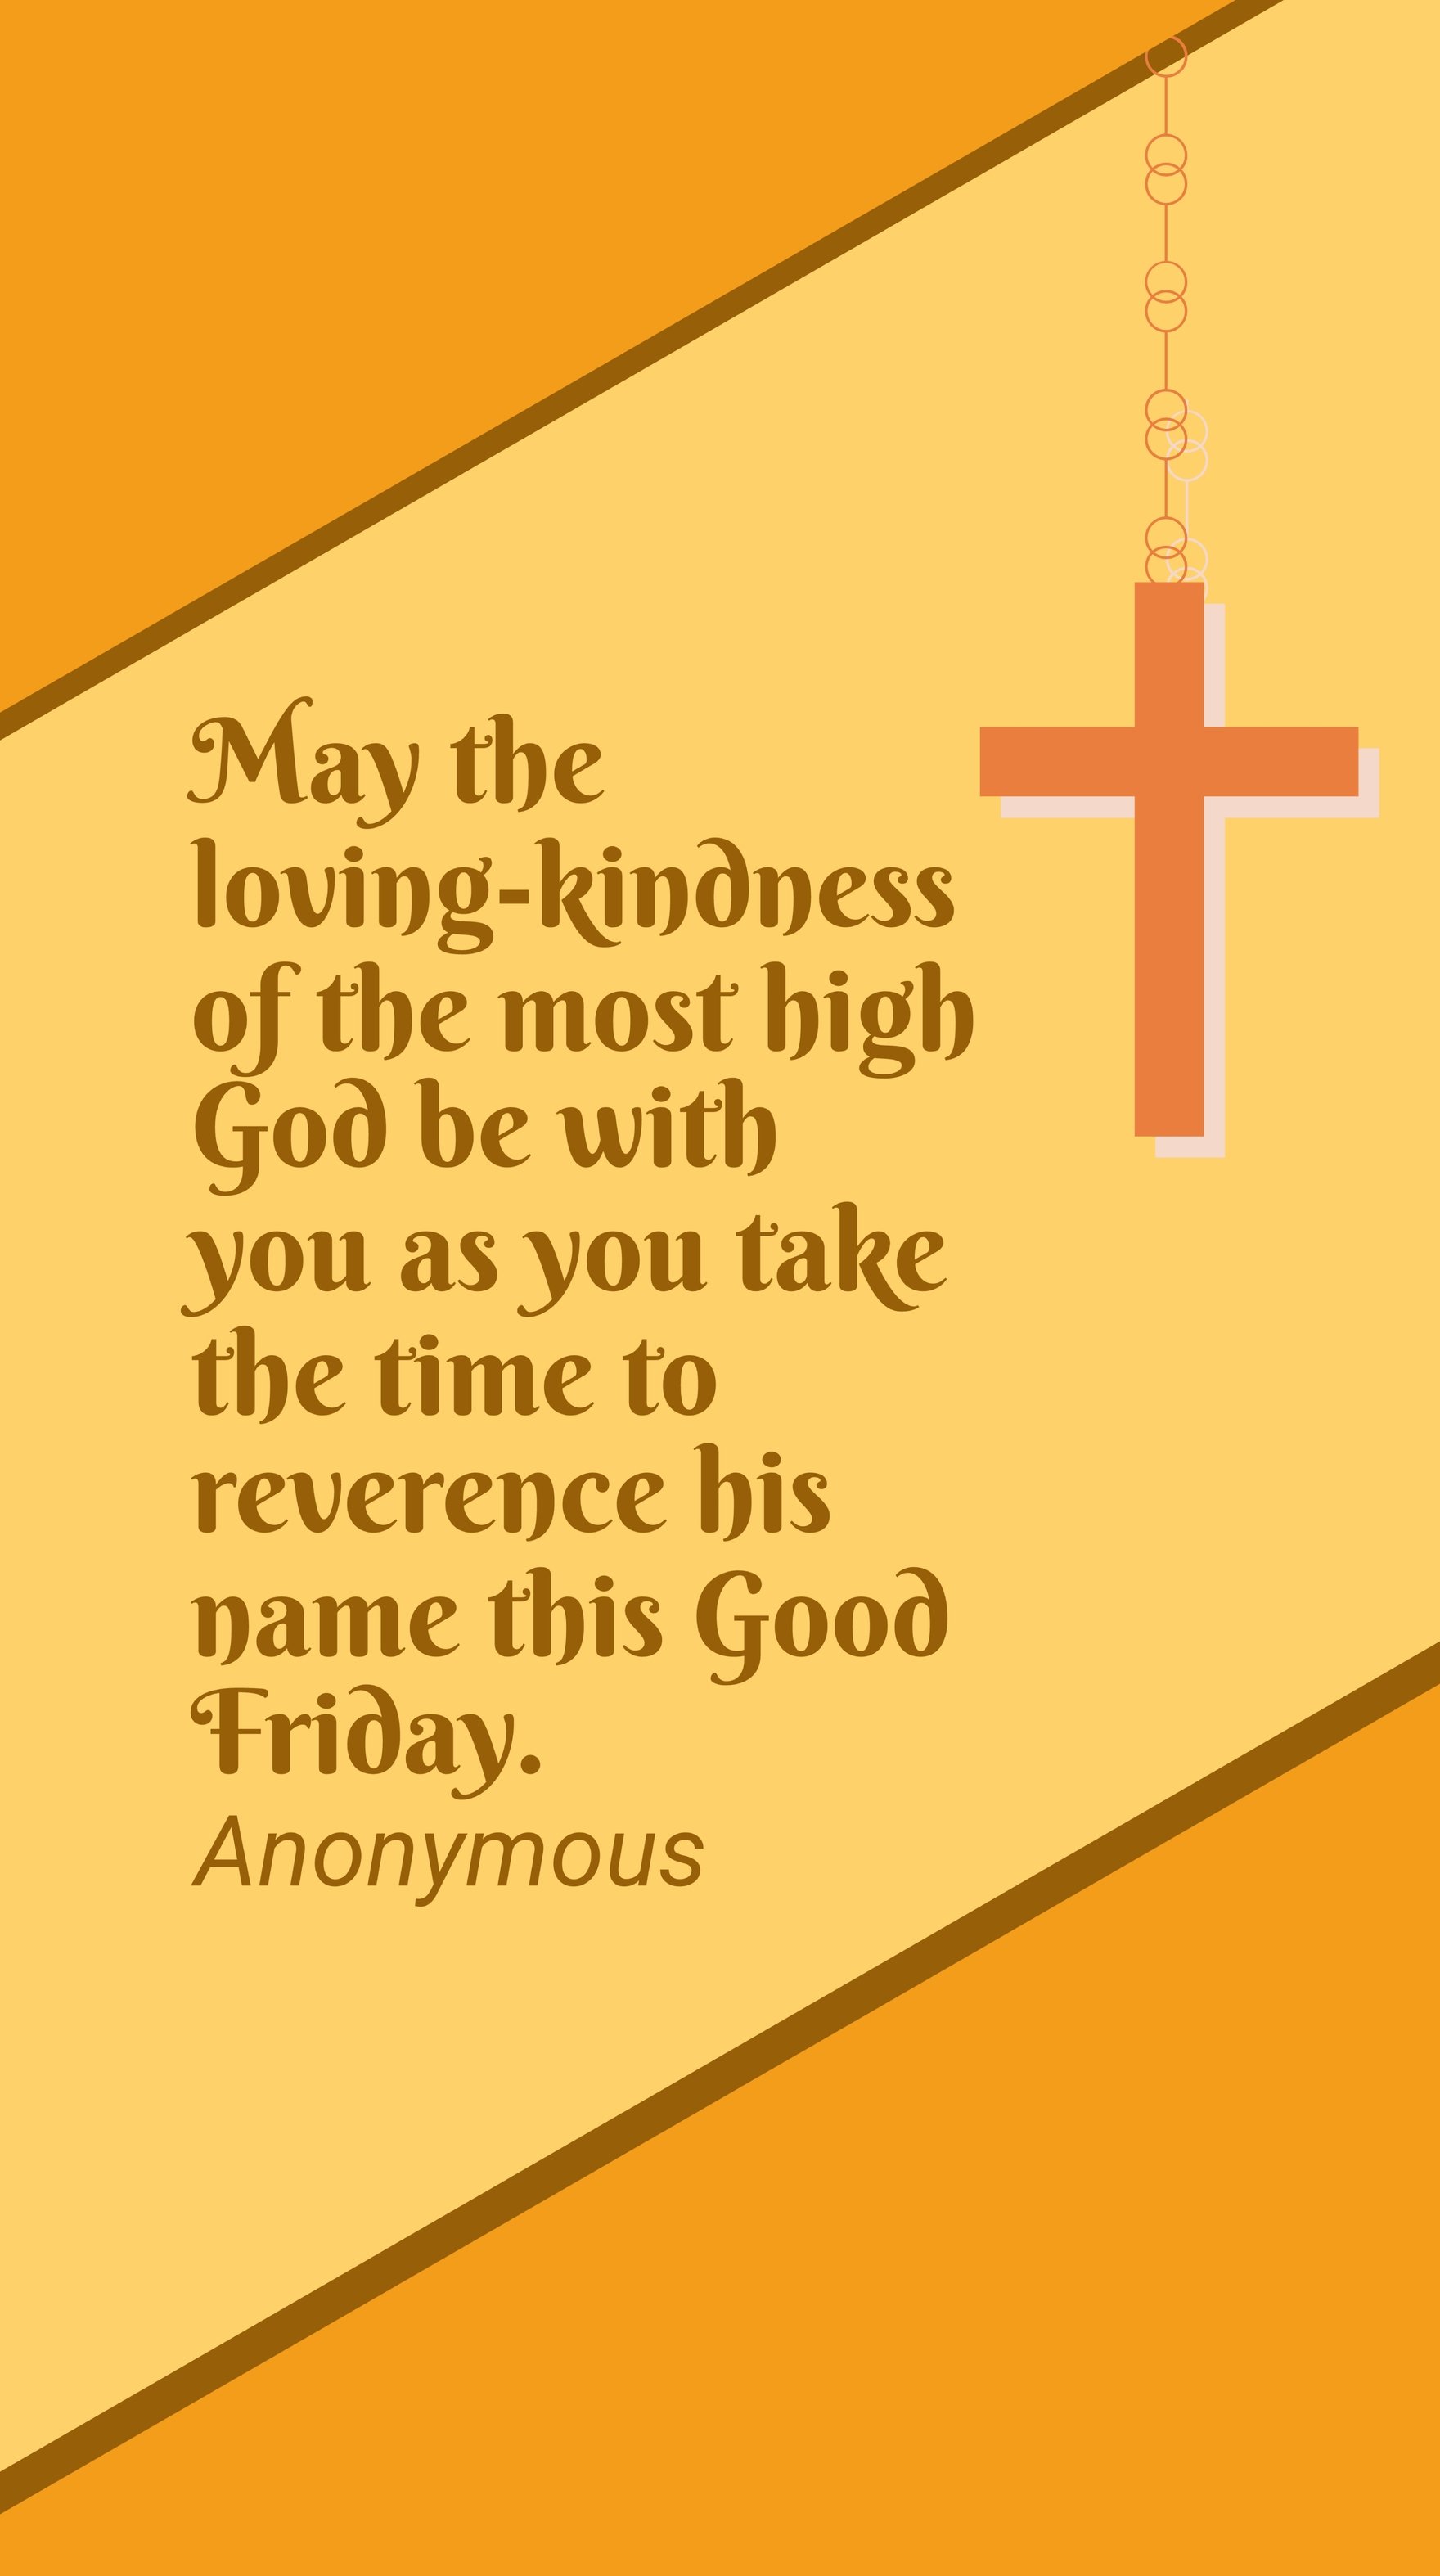 Free Anonymous - May the loving-kindness of the most high God be with you as you take the time to reverence his name this Good Friday. in JPG